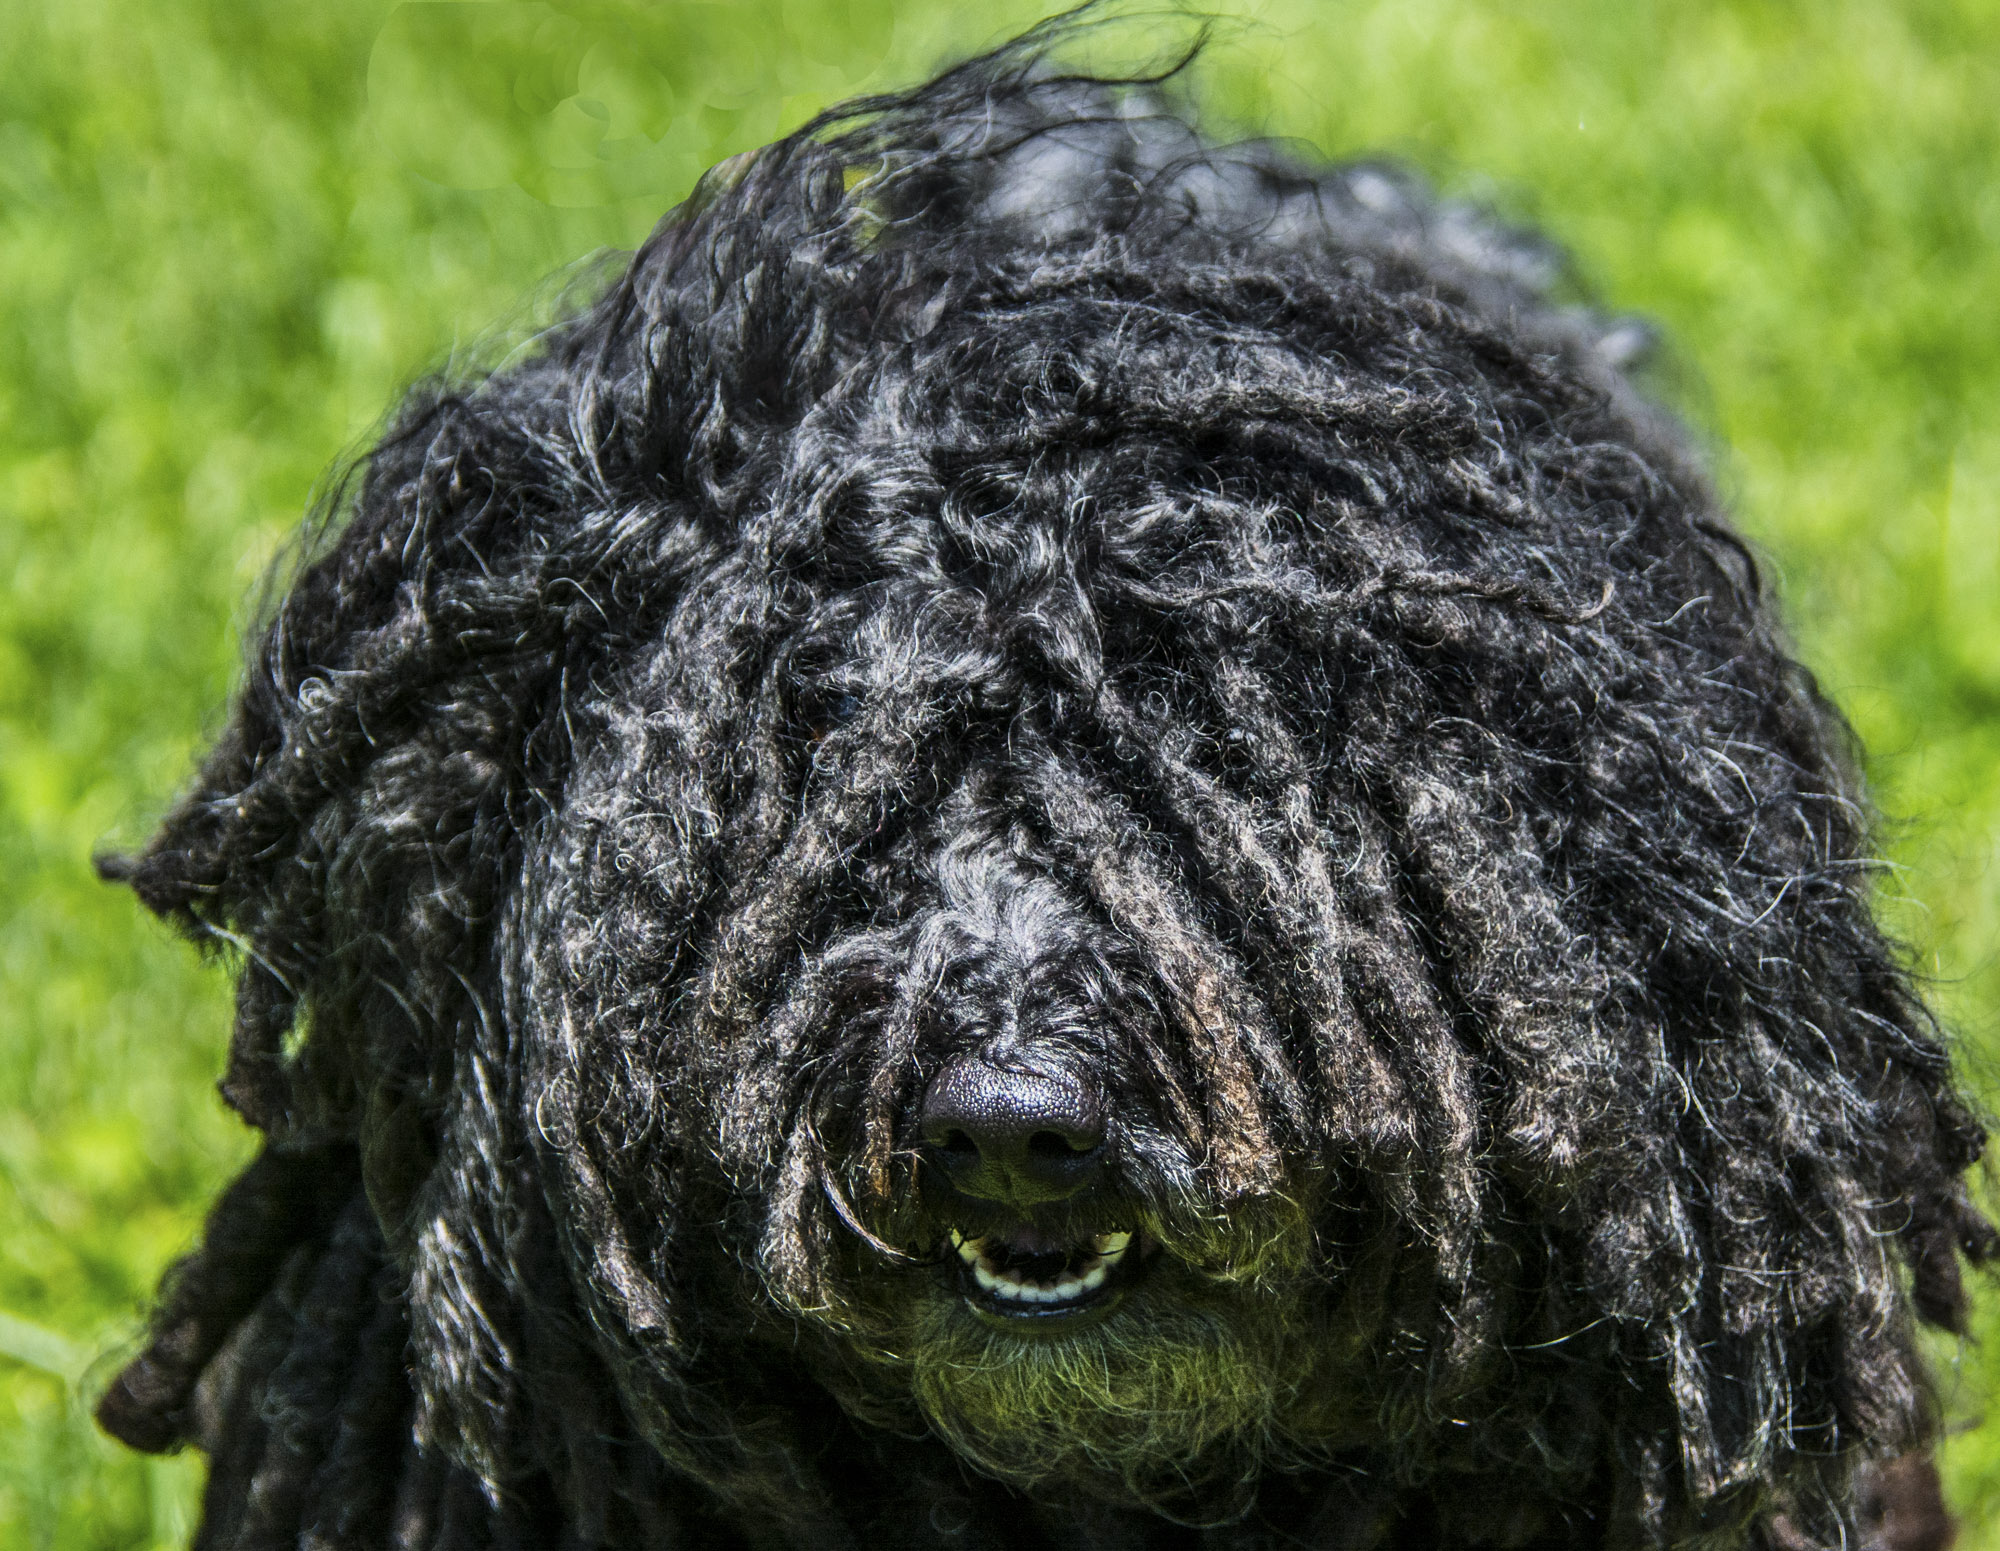 black dog with dreadlocks on grass looking up